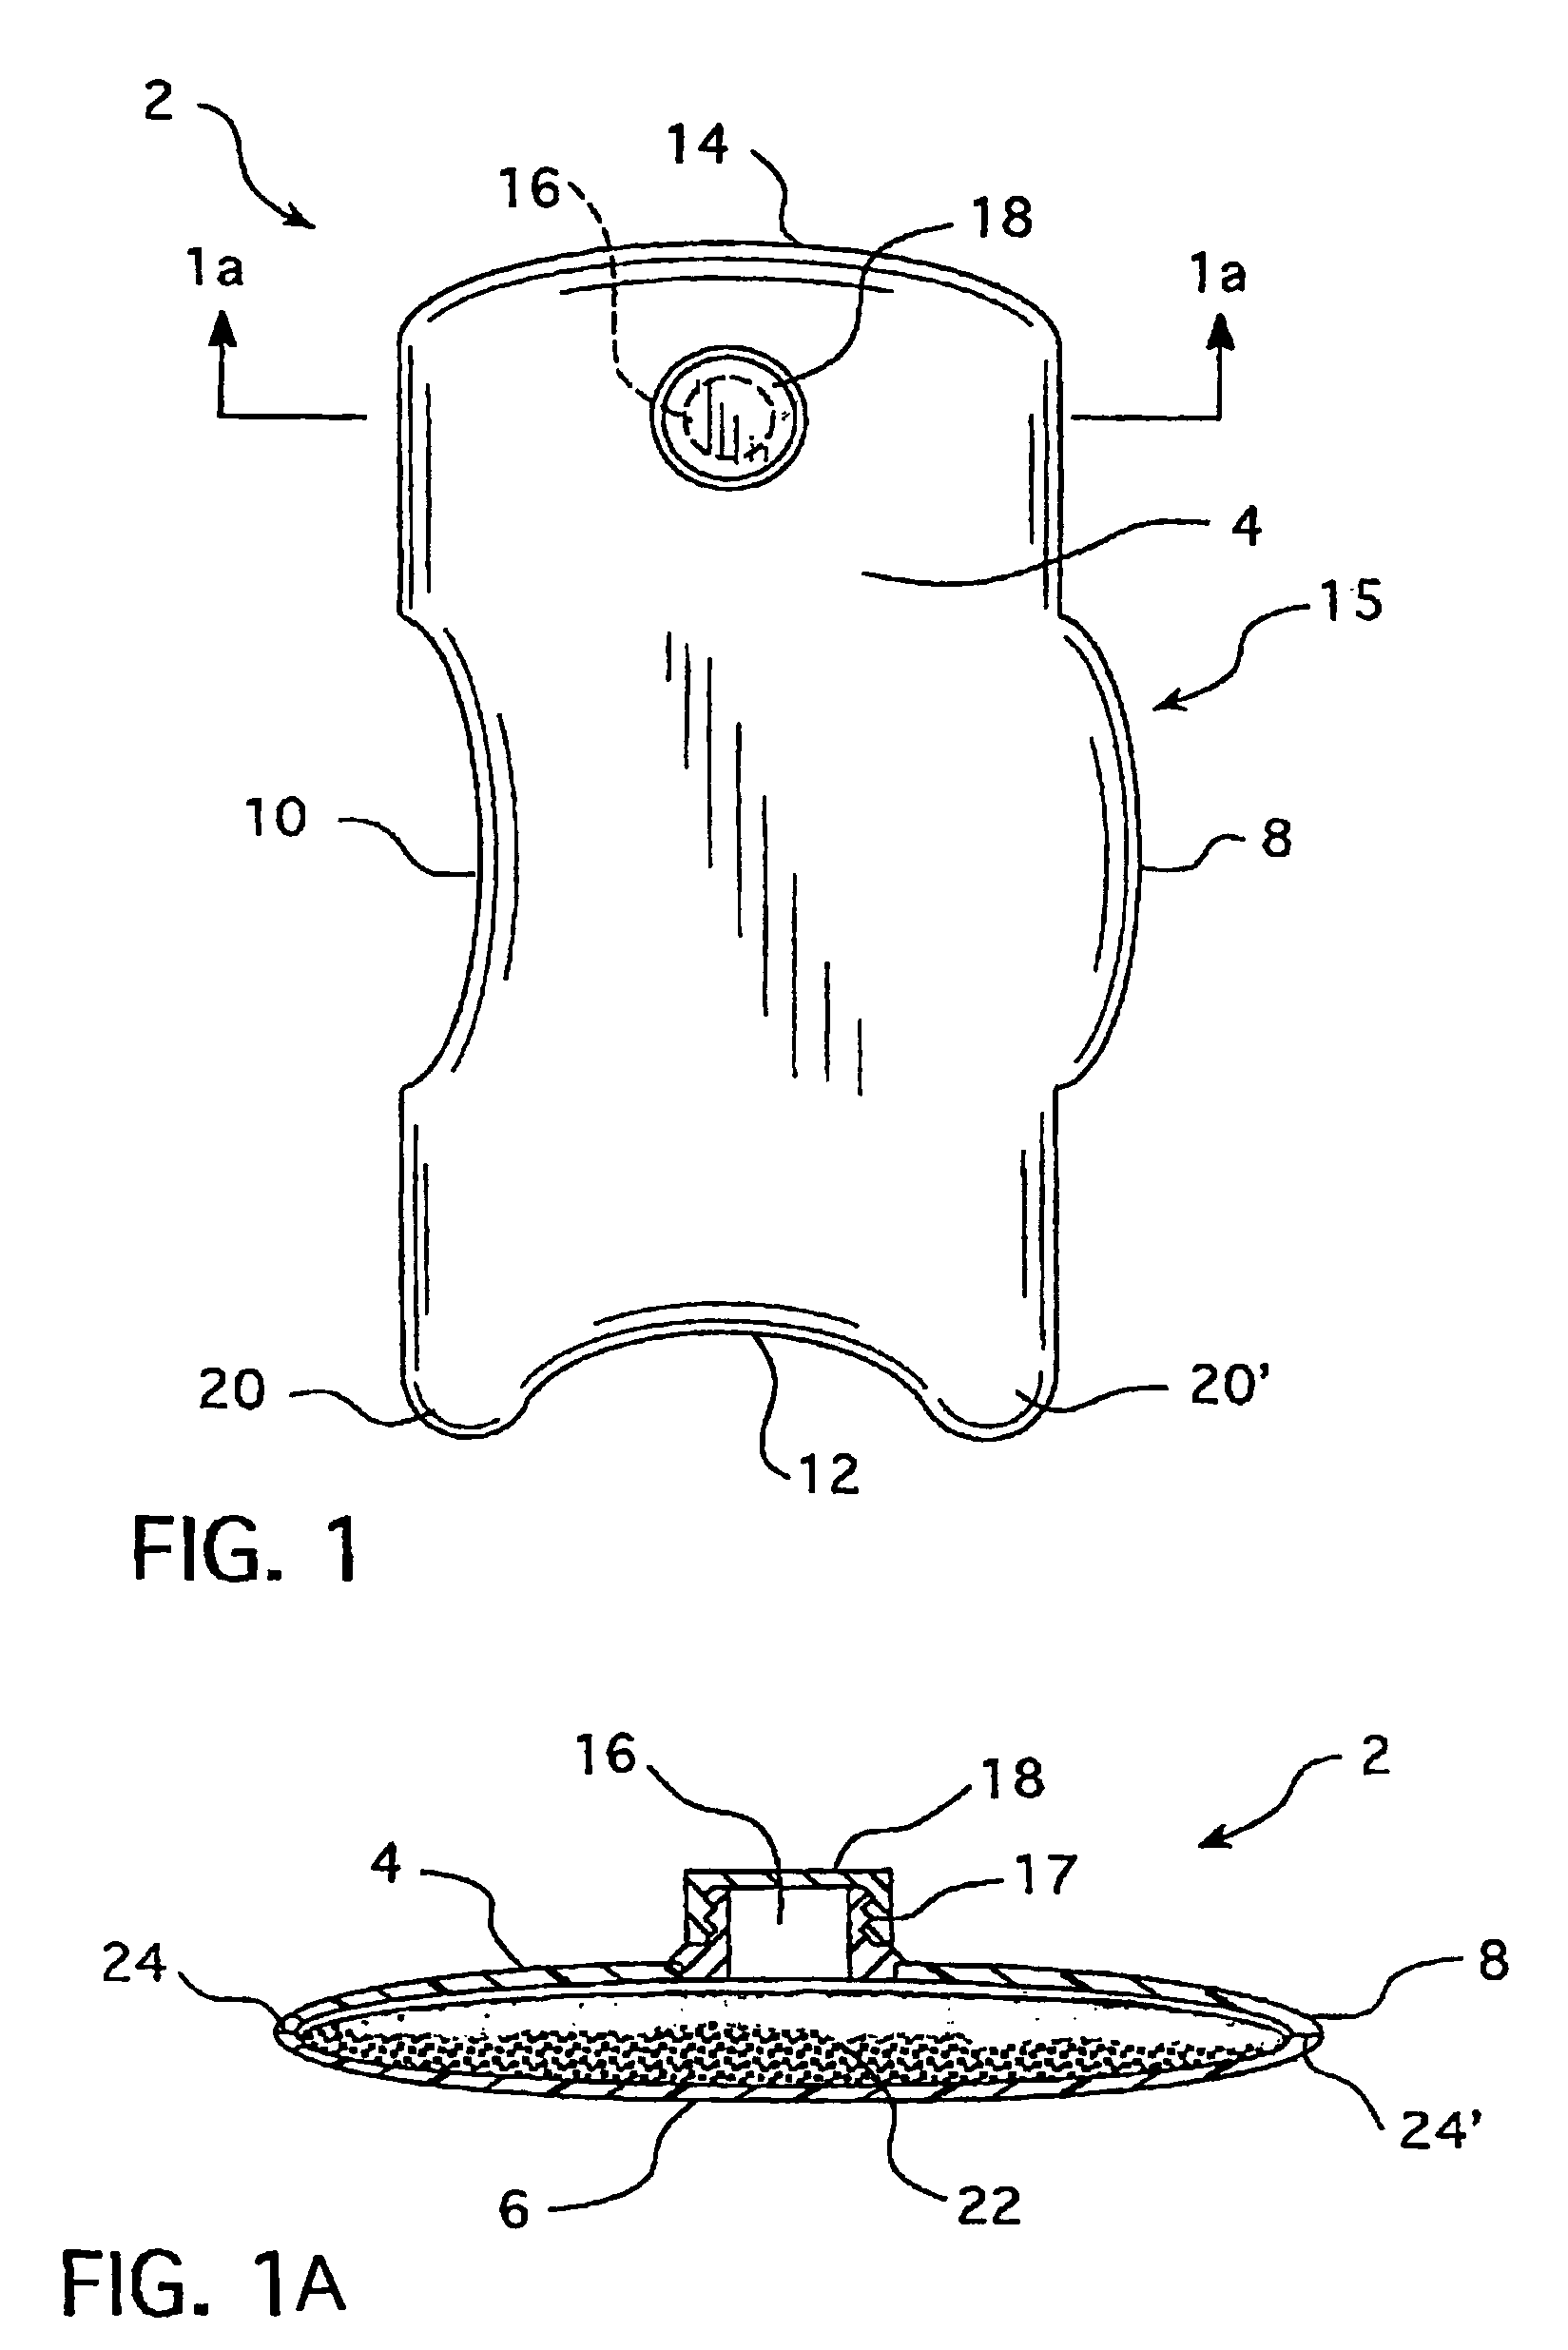 Method of embalming with sand-filled weights